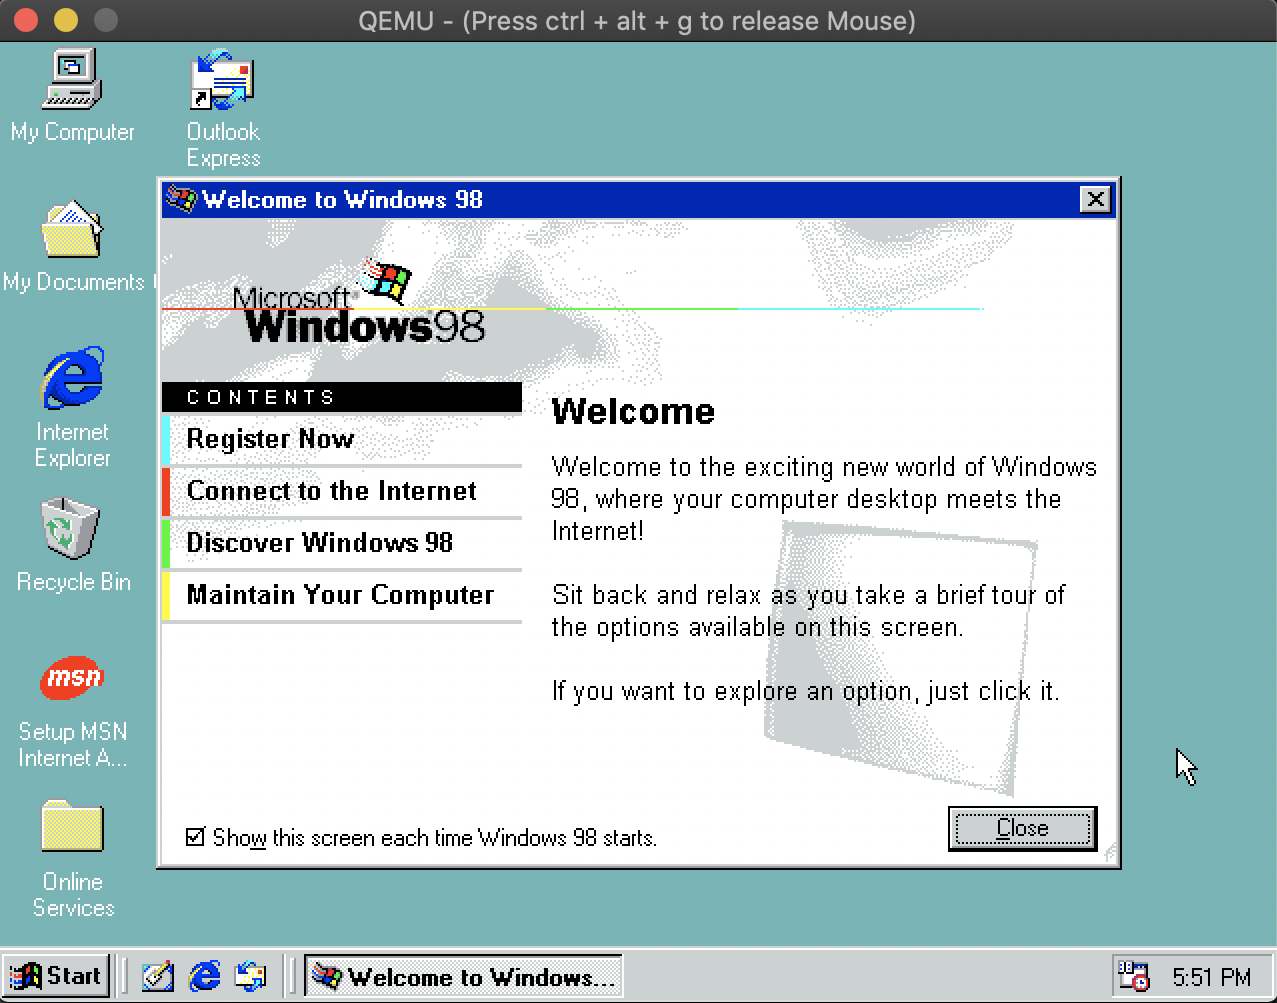 Welcome to Windows 98